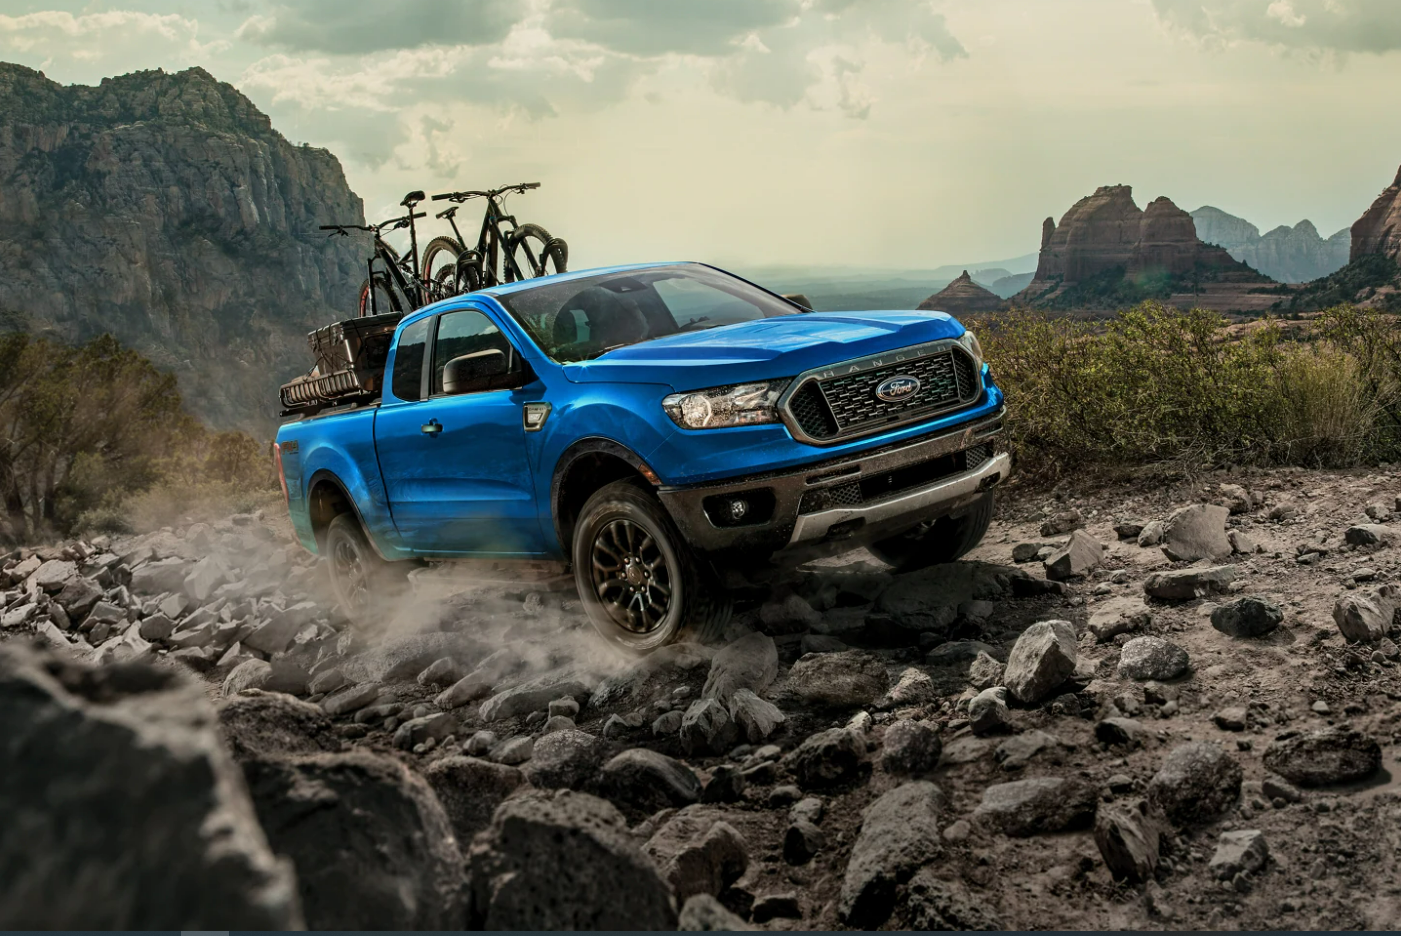 A view of the front of a blue 2023 Ford Ranger as it climbs a rocky hill